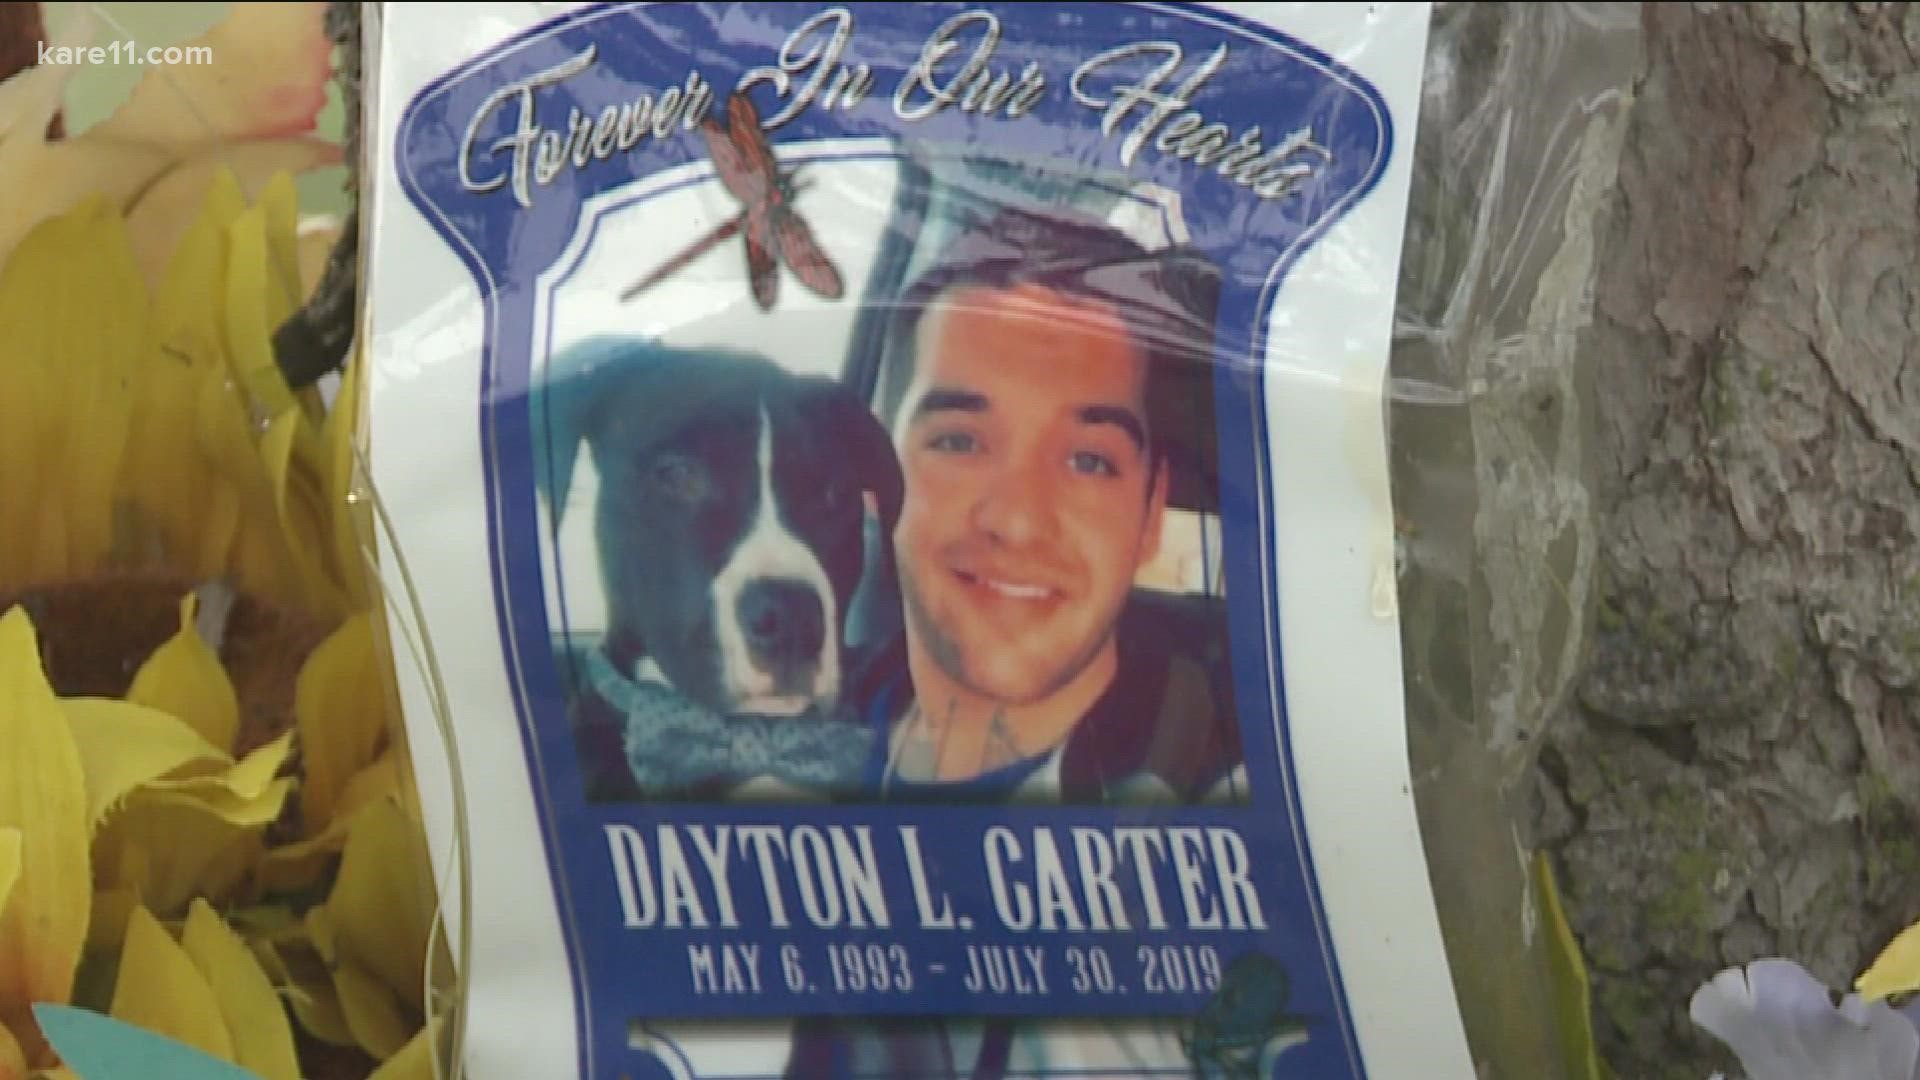 Two years ago today 26-year-old Dayton Rossetti was murdered in Maple Grove. His family is still searching for answers.